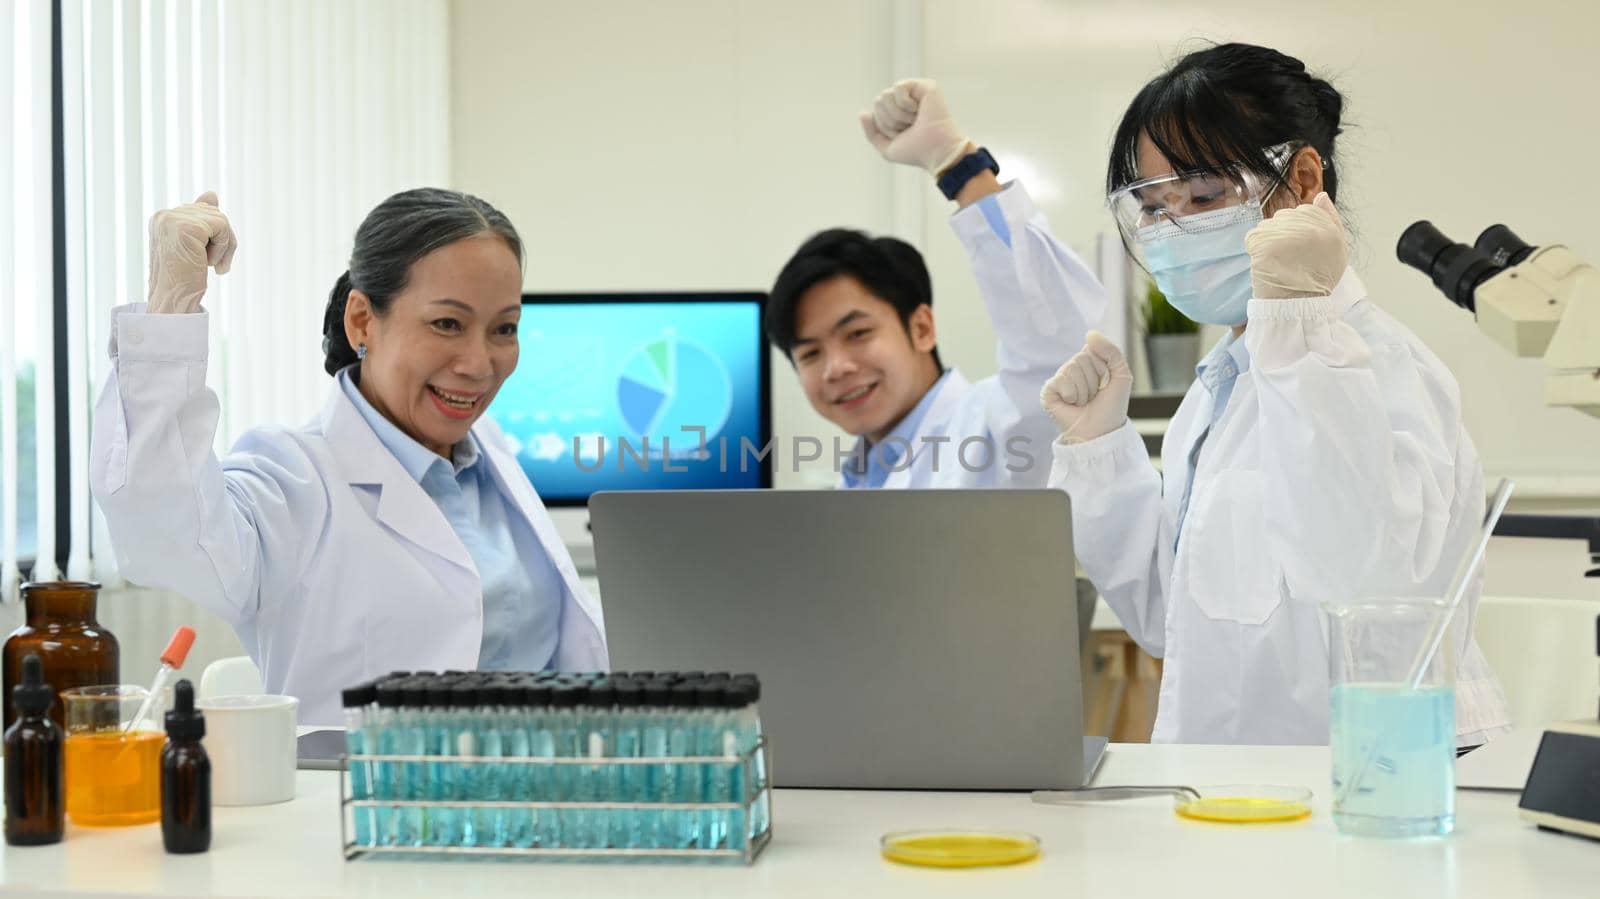 Group of happy scientists celebrating success results of the experiment, makes an important discovery in research laboratory.